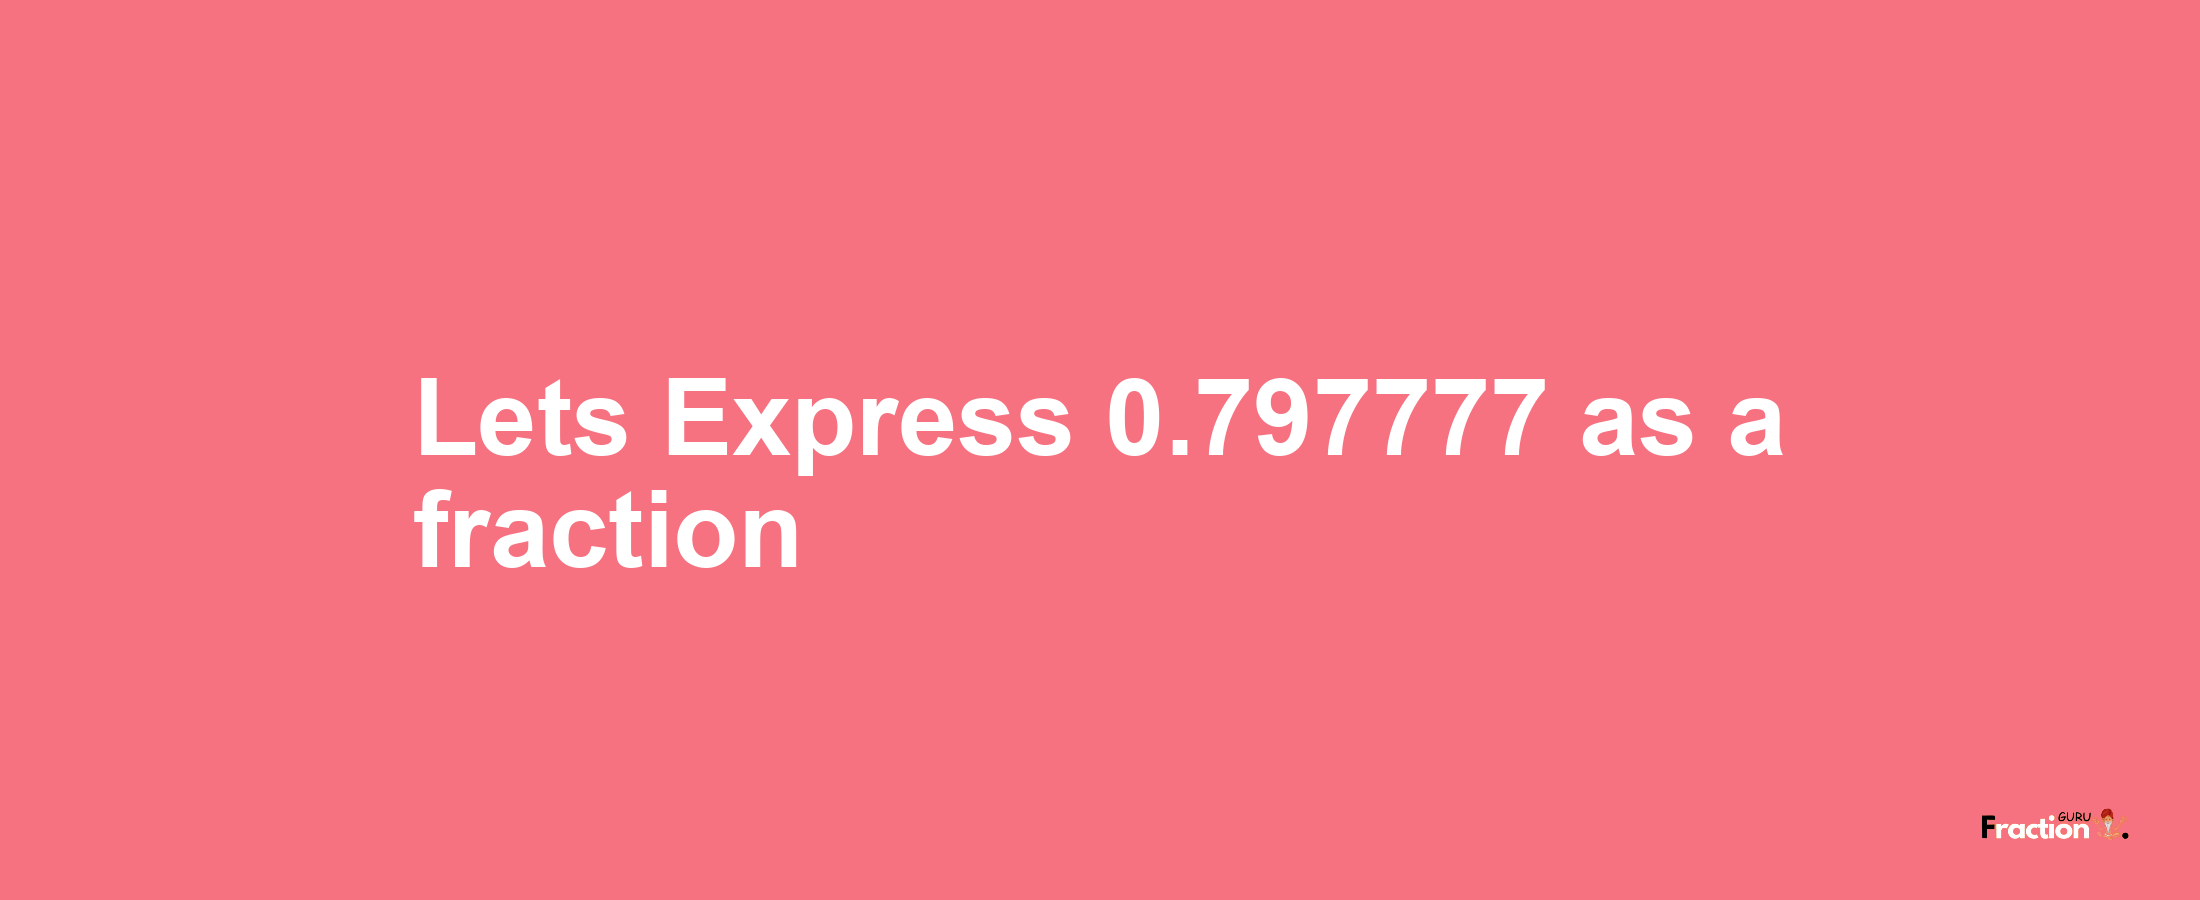 Lets Express 0.797777 as afraction